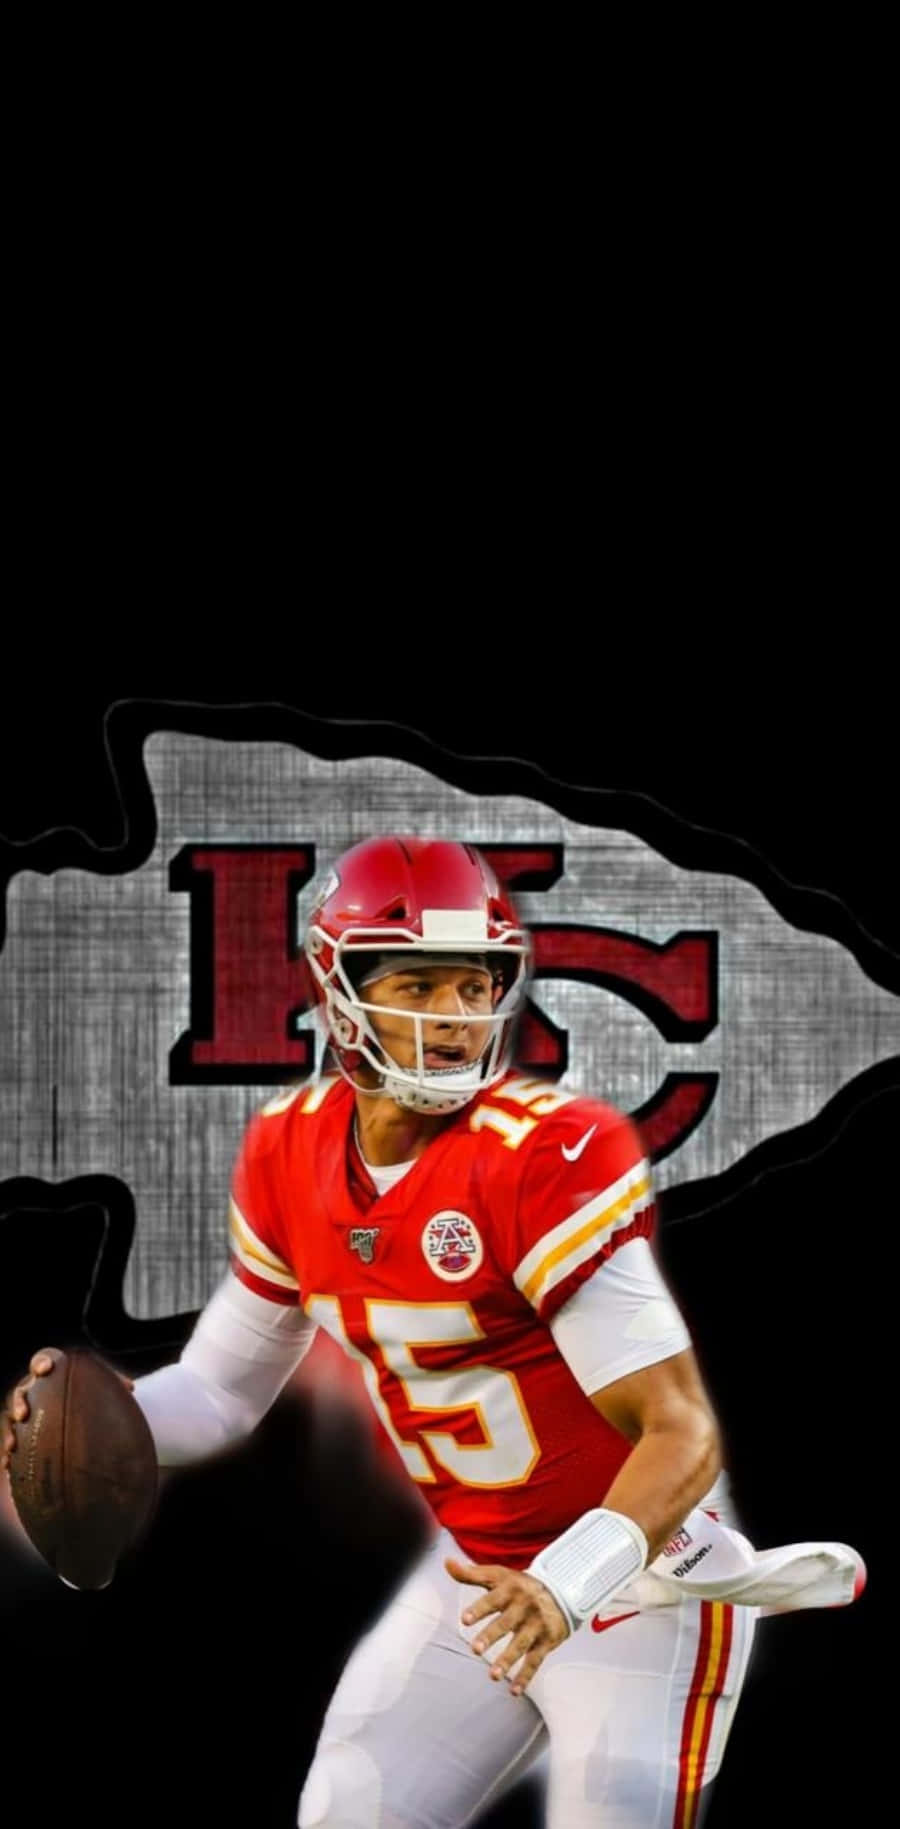 Patrick Mahomes Staying Cool During A Kansas City Chiefs Pre-game Warmup Background